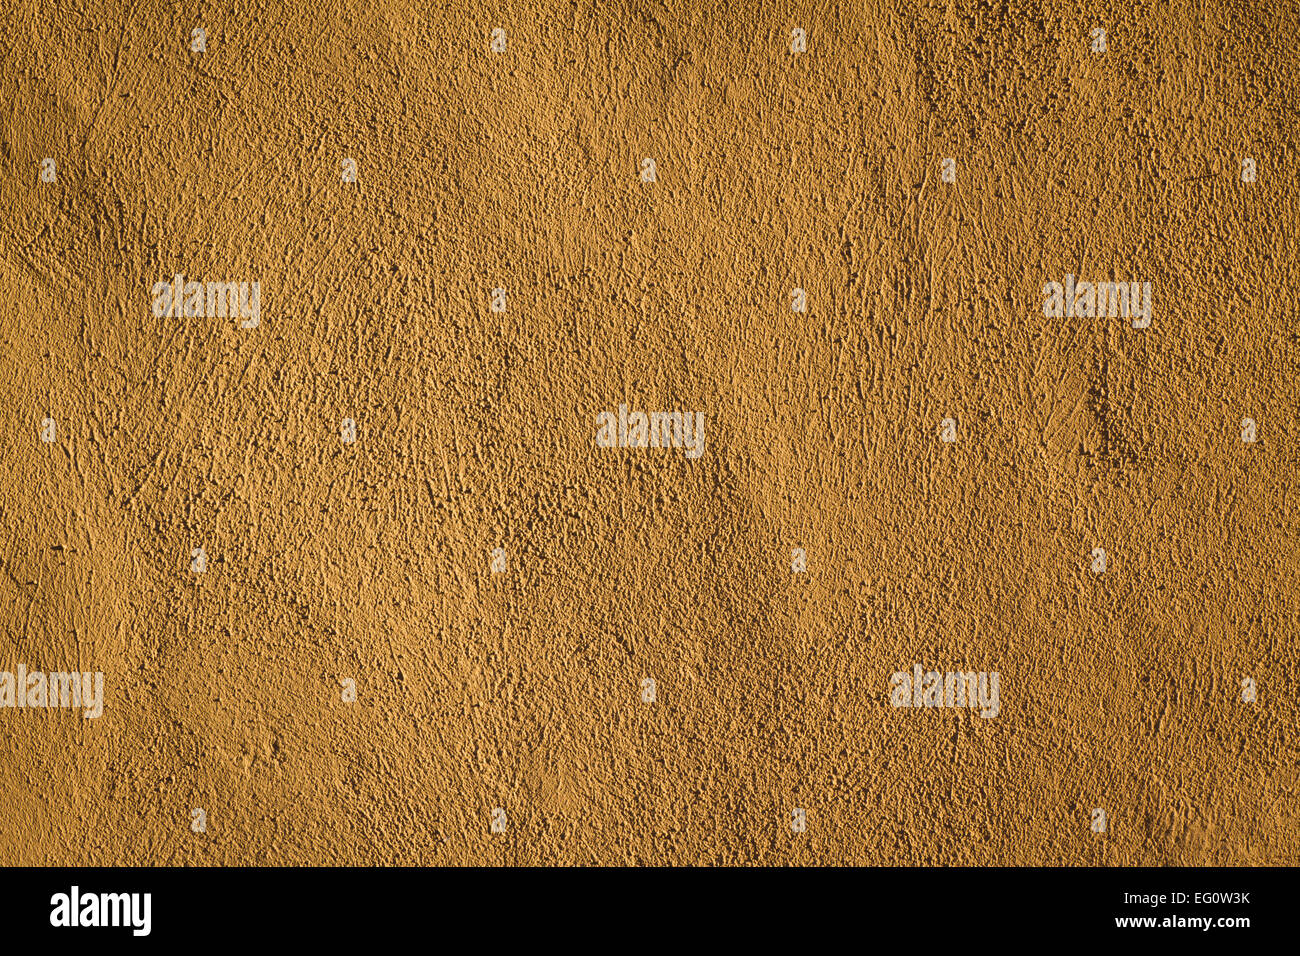 Wall image of a textured concrete wall. It's a brown / orange colored background. Stock Photo